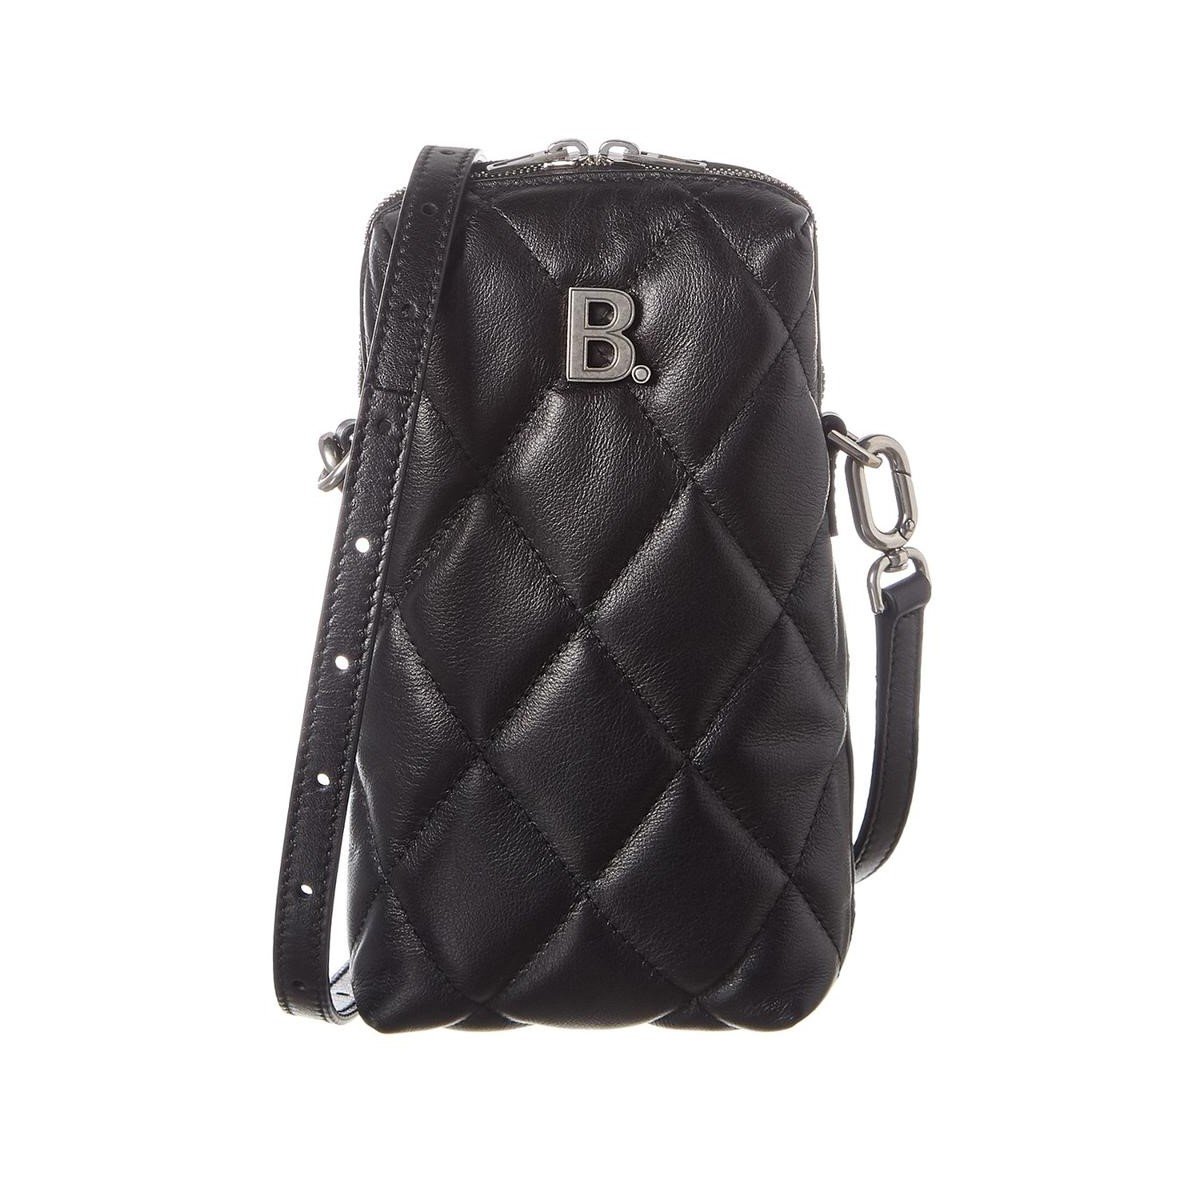 Balenciaga Touch Black Nappa Leather Quilted Puffy Bag 593375 - LUXURYMRKT